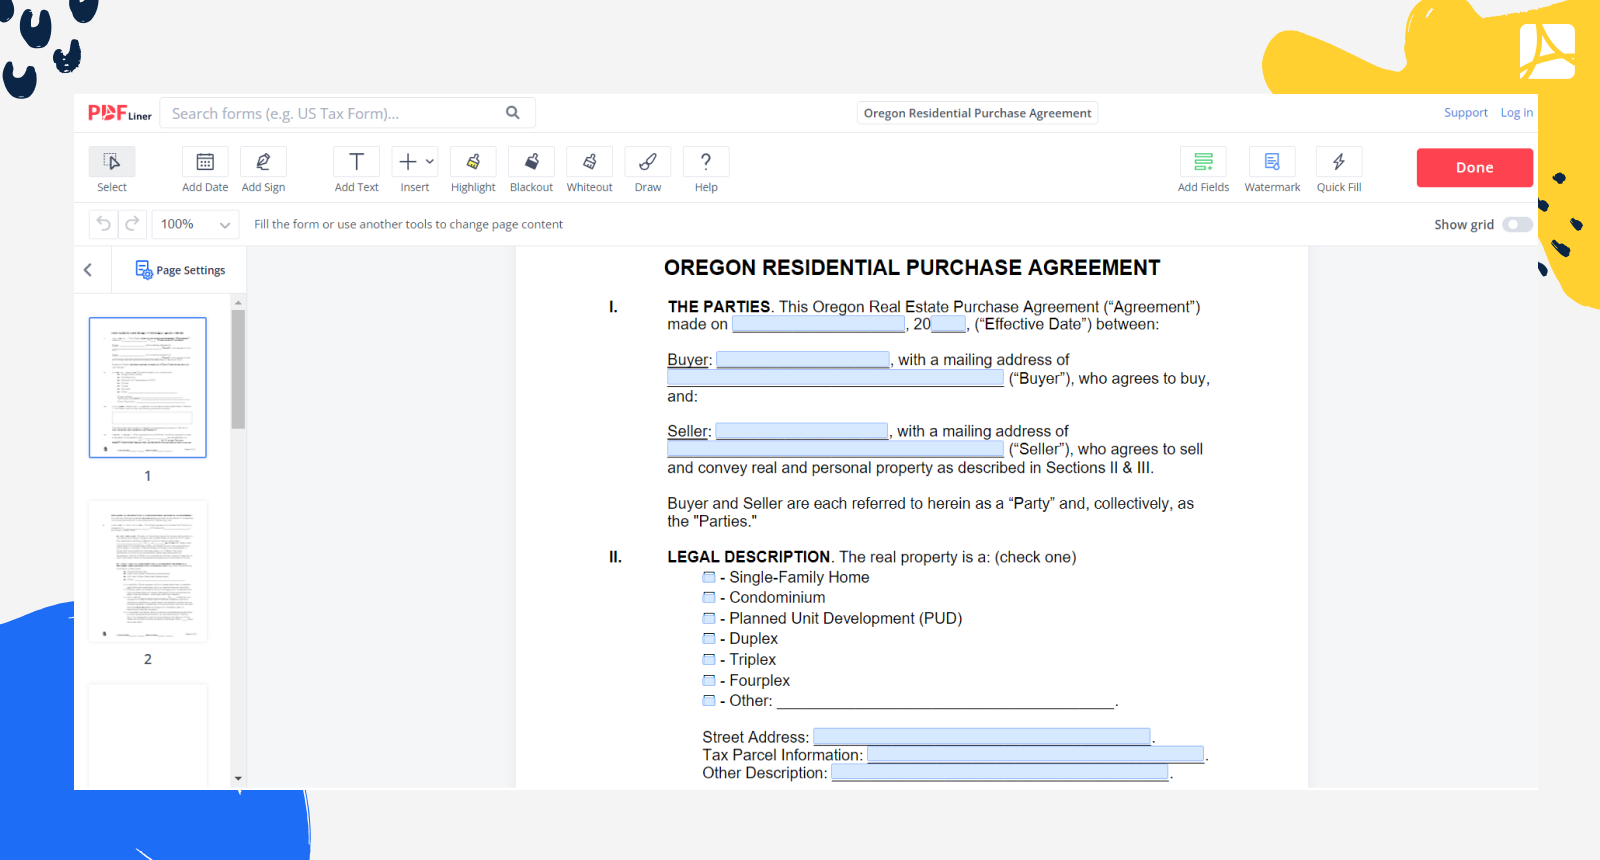 Oregon Residential Purchase Agreement Form Screenshot